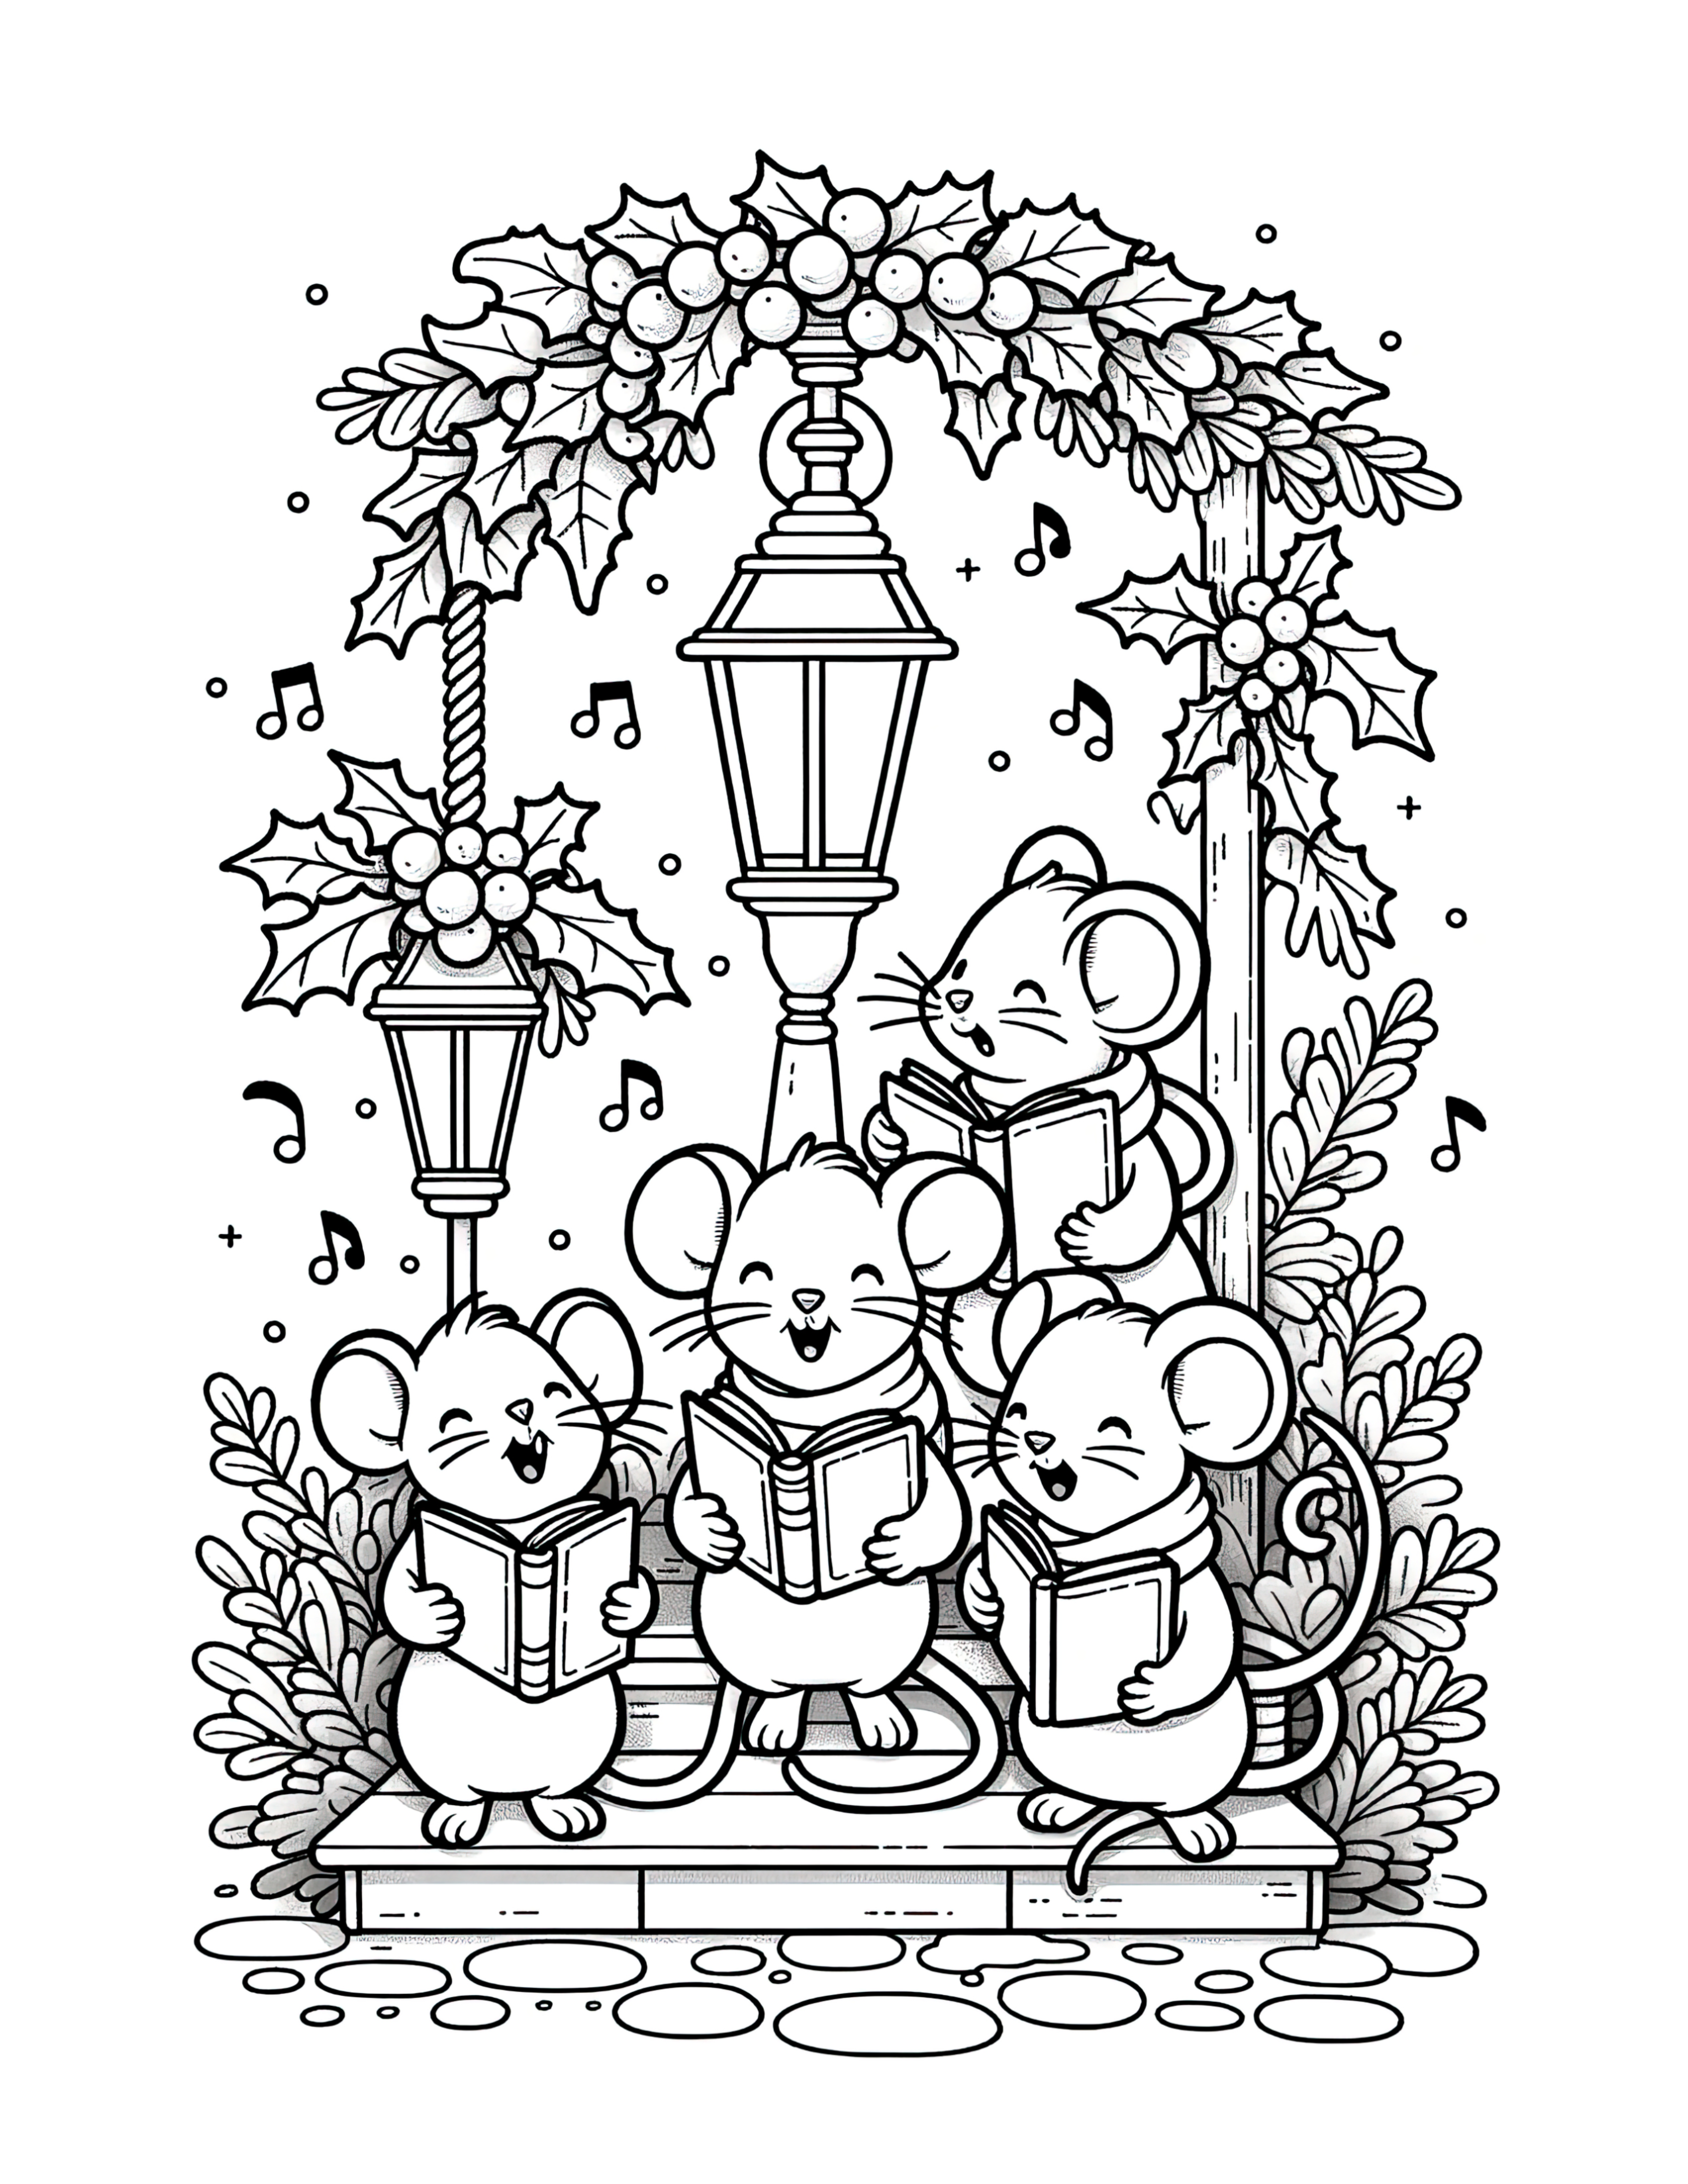 Mice Singing Coloring Page